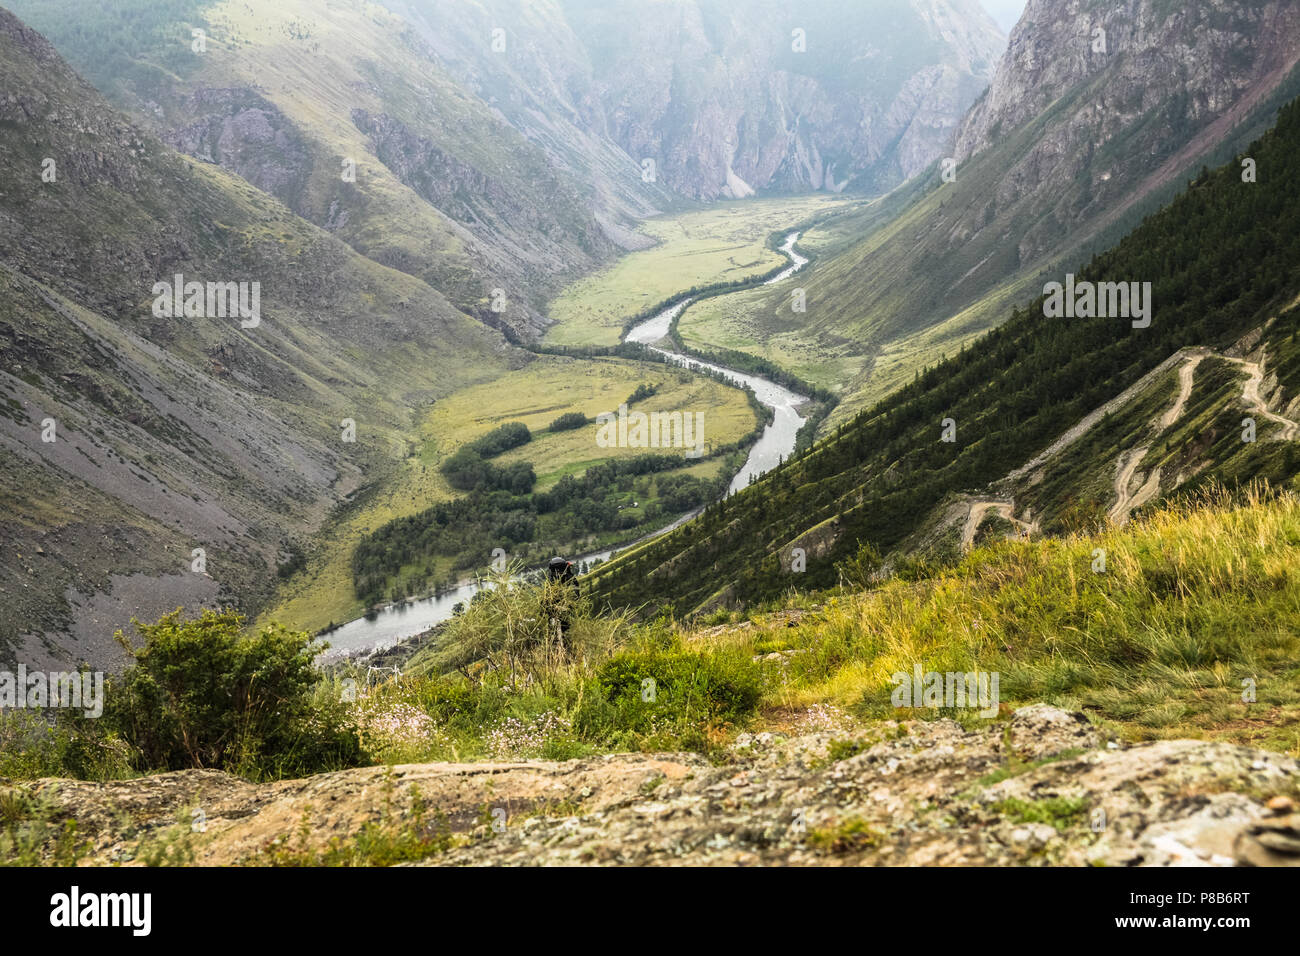 scenic landscape with mountain valley and river, Altai, Russia Stock Photo